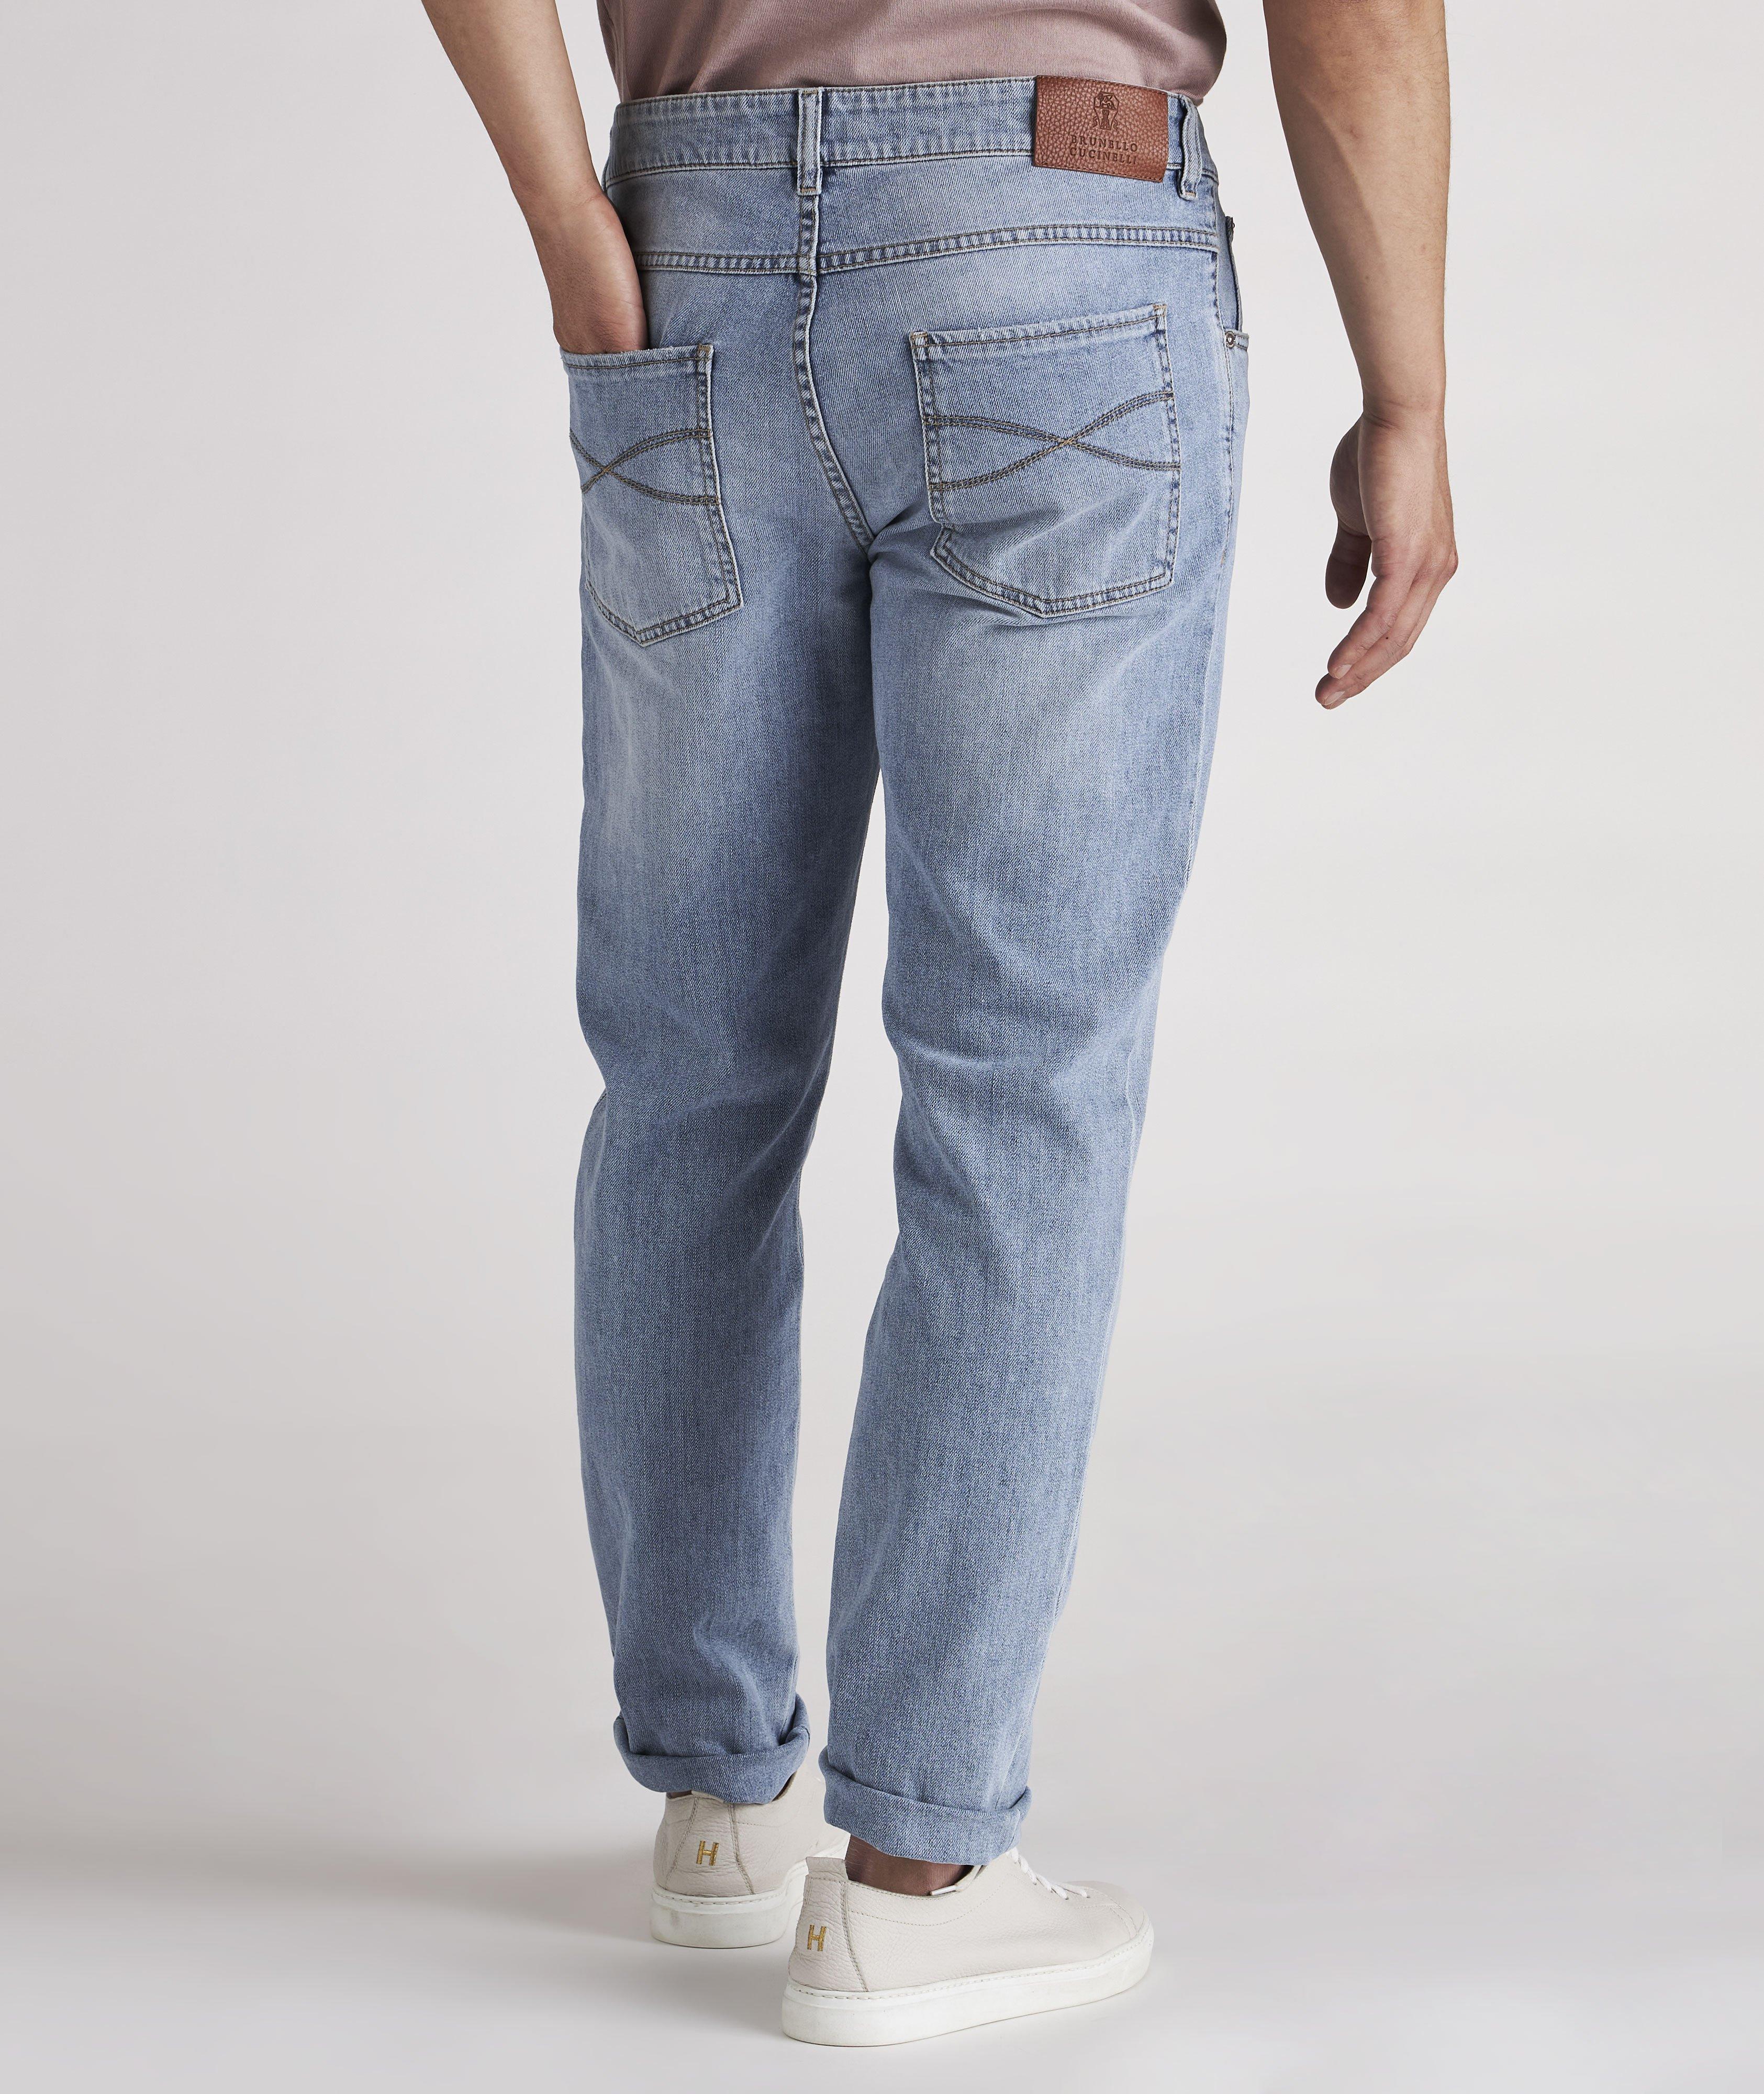 Skinny-Fit Stretch-Cotton Jeans image 3